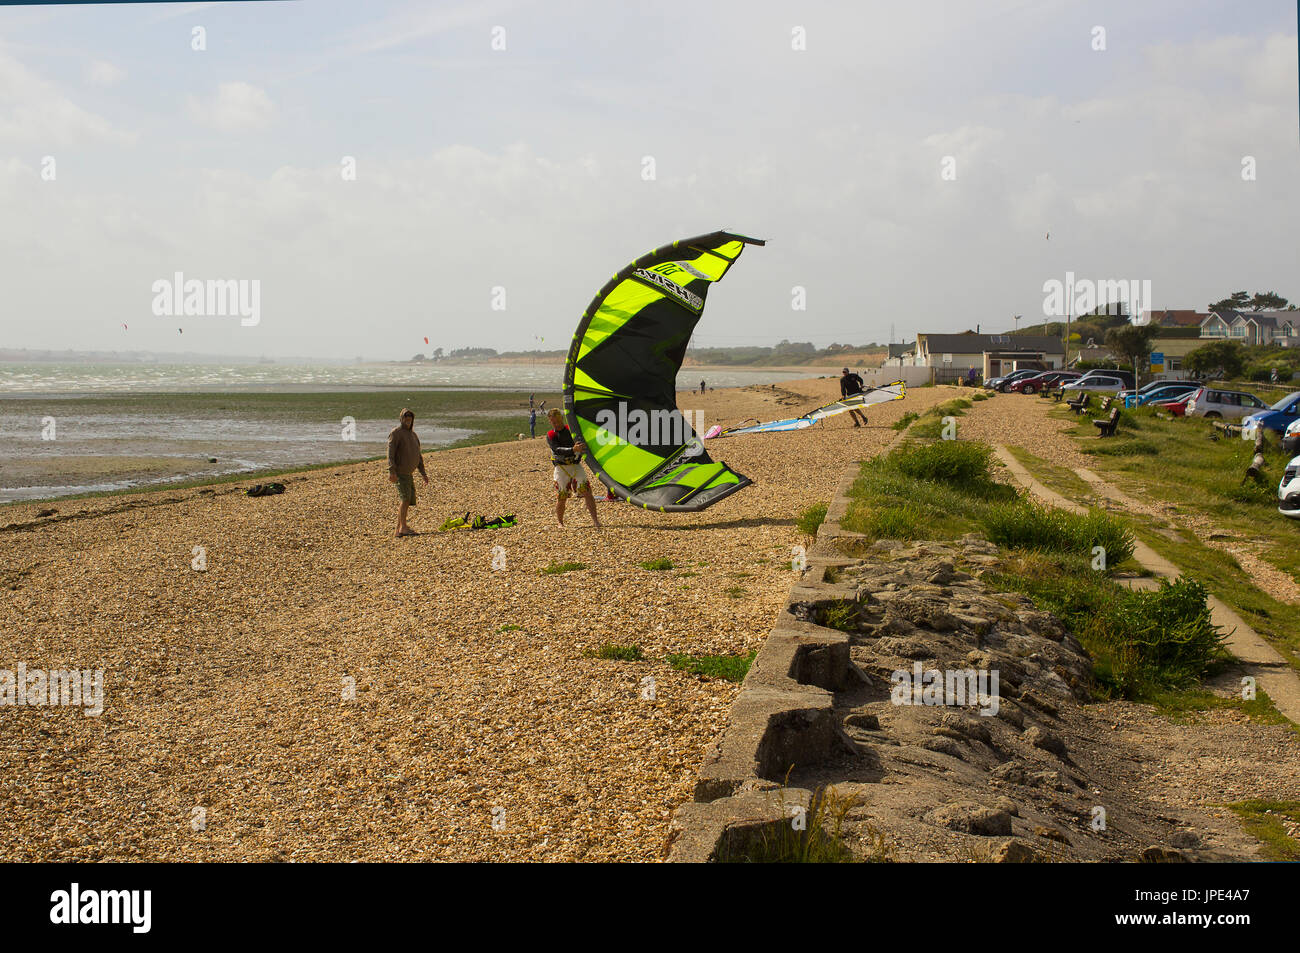 A couple of young men struggle against a stiff breeze to prepare their para glider for an afternoons sport at the beach in Titchfield, Hampshire in th Stock Photo